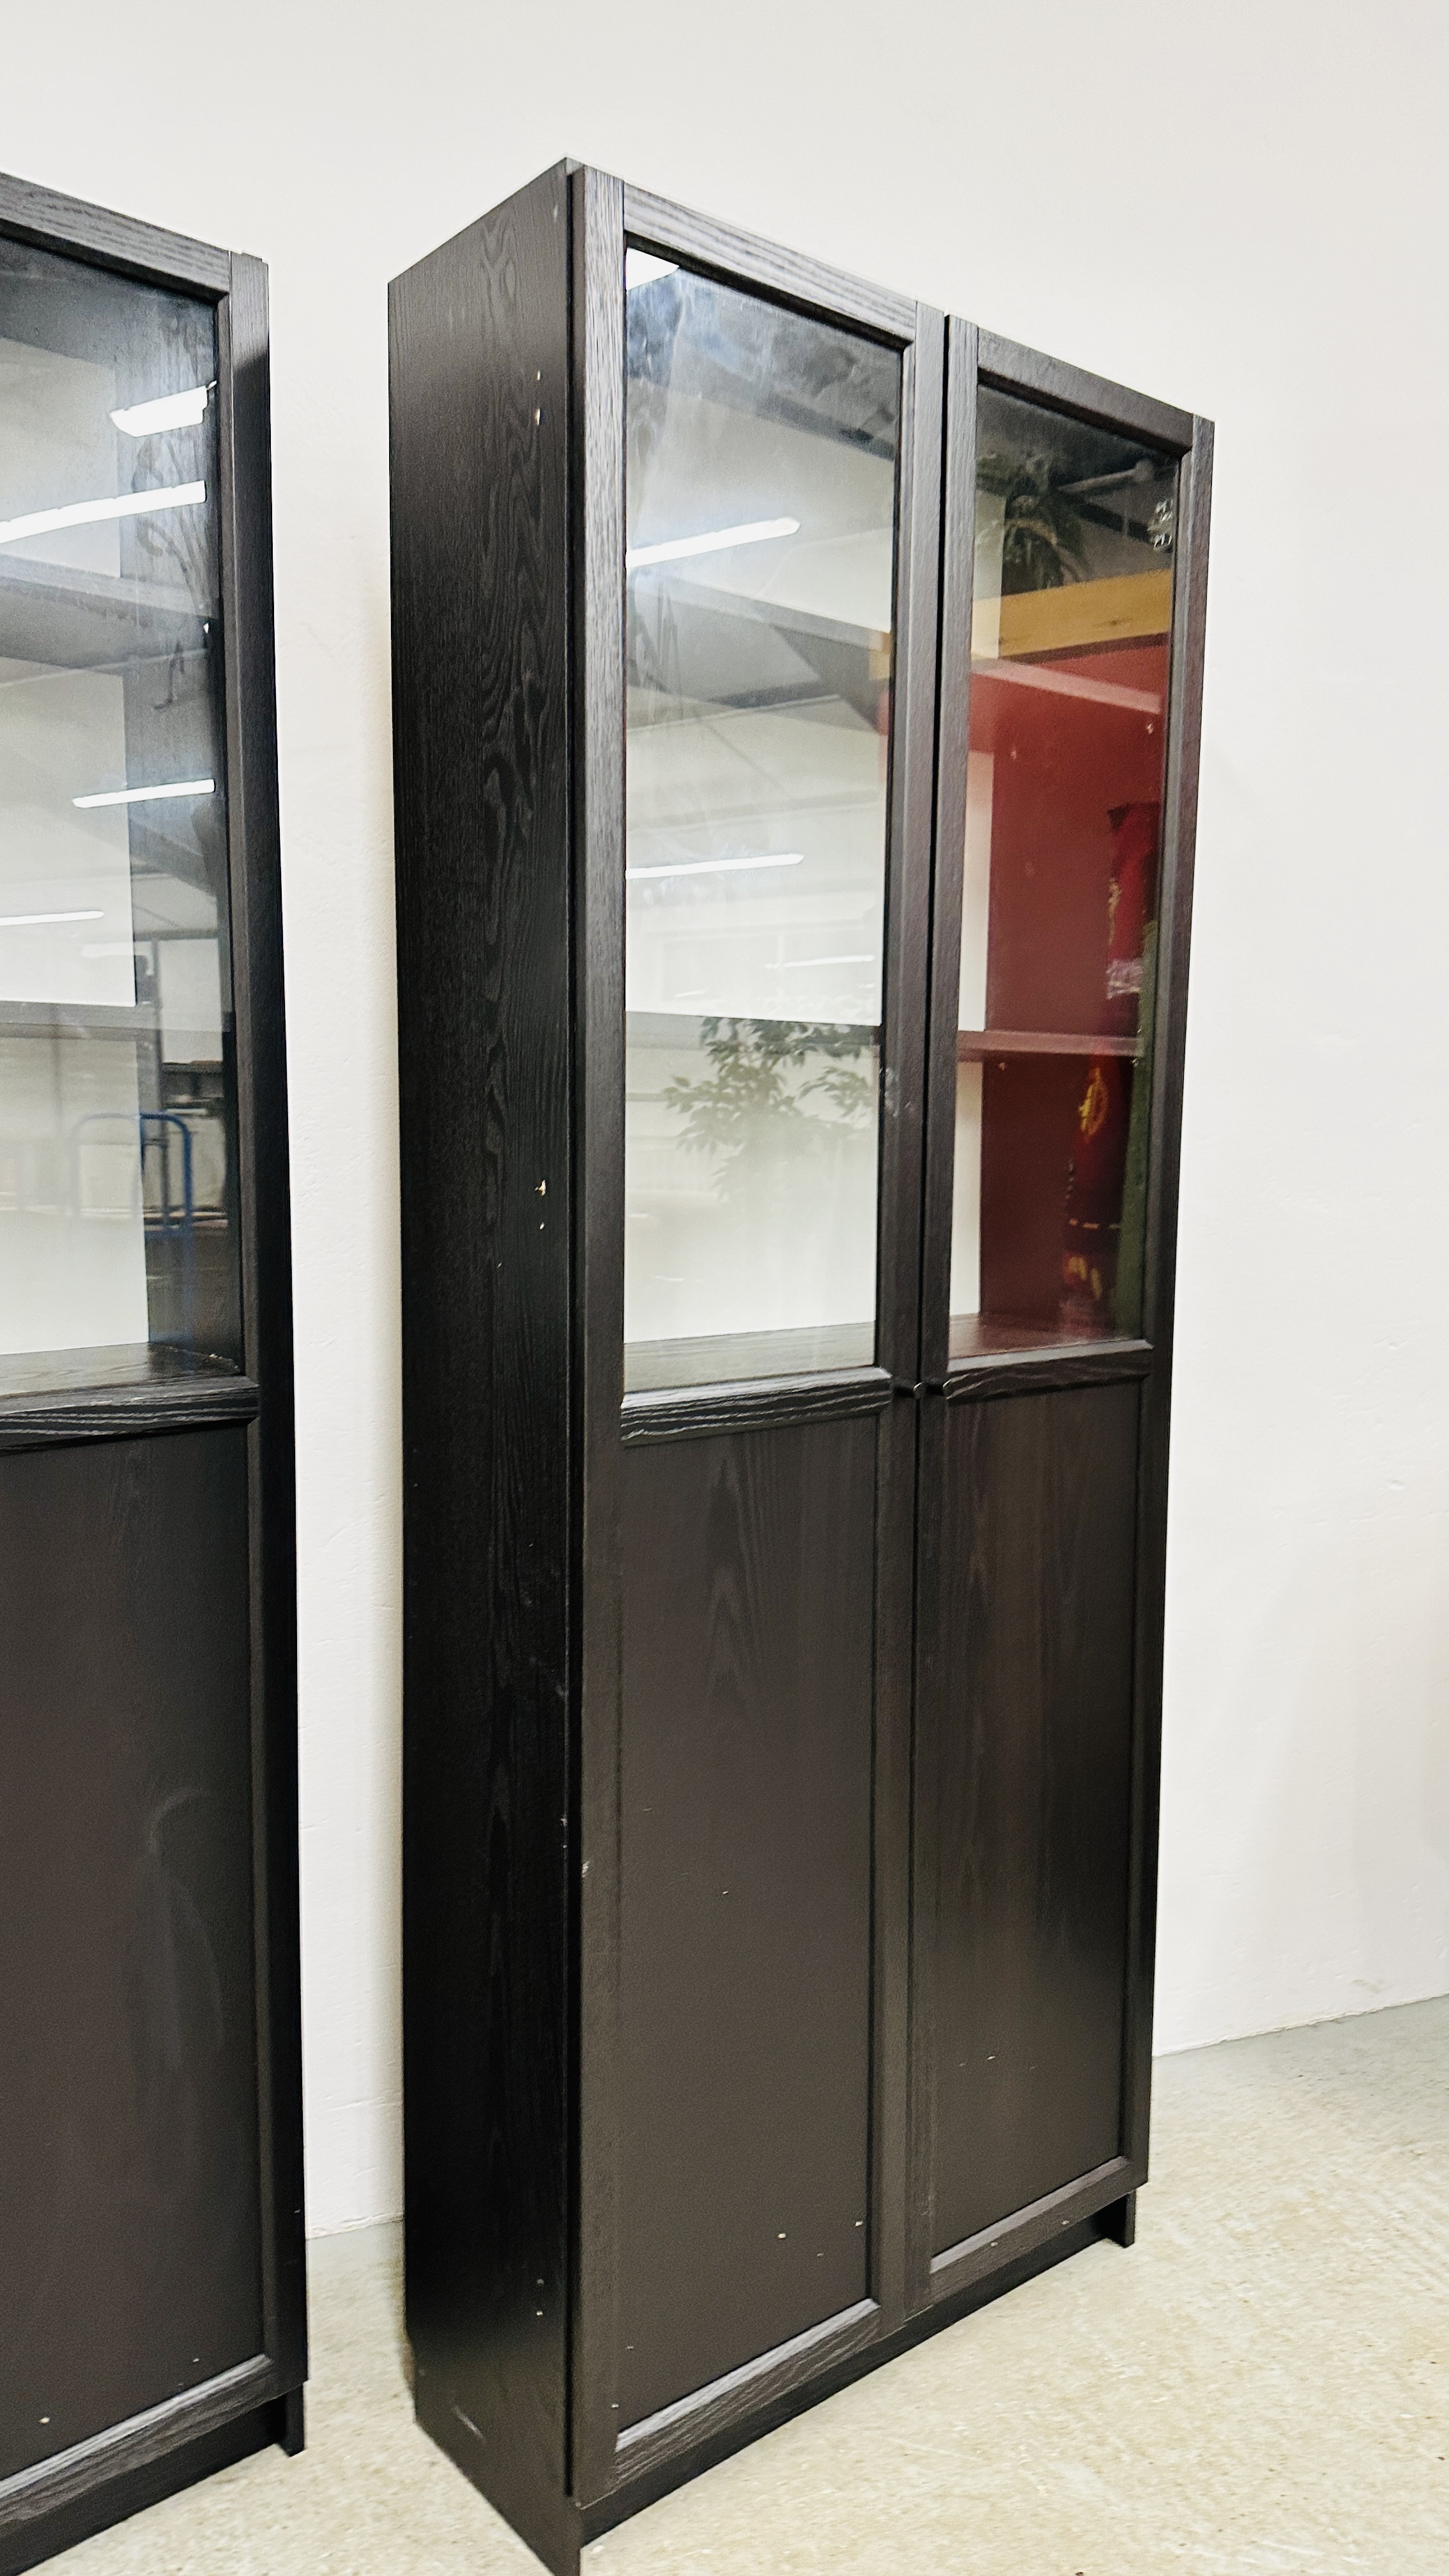 2 X MODERN BLACK ASH EFFECT FINISH FULL HEIGHT WALL CABINETS WITH GLAZED TOPS EACH W 80CM, D 30CM, - Image 5 of 8